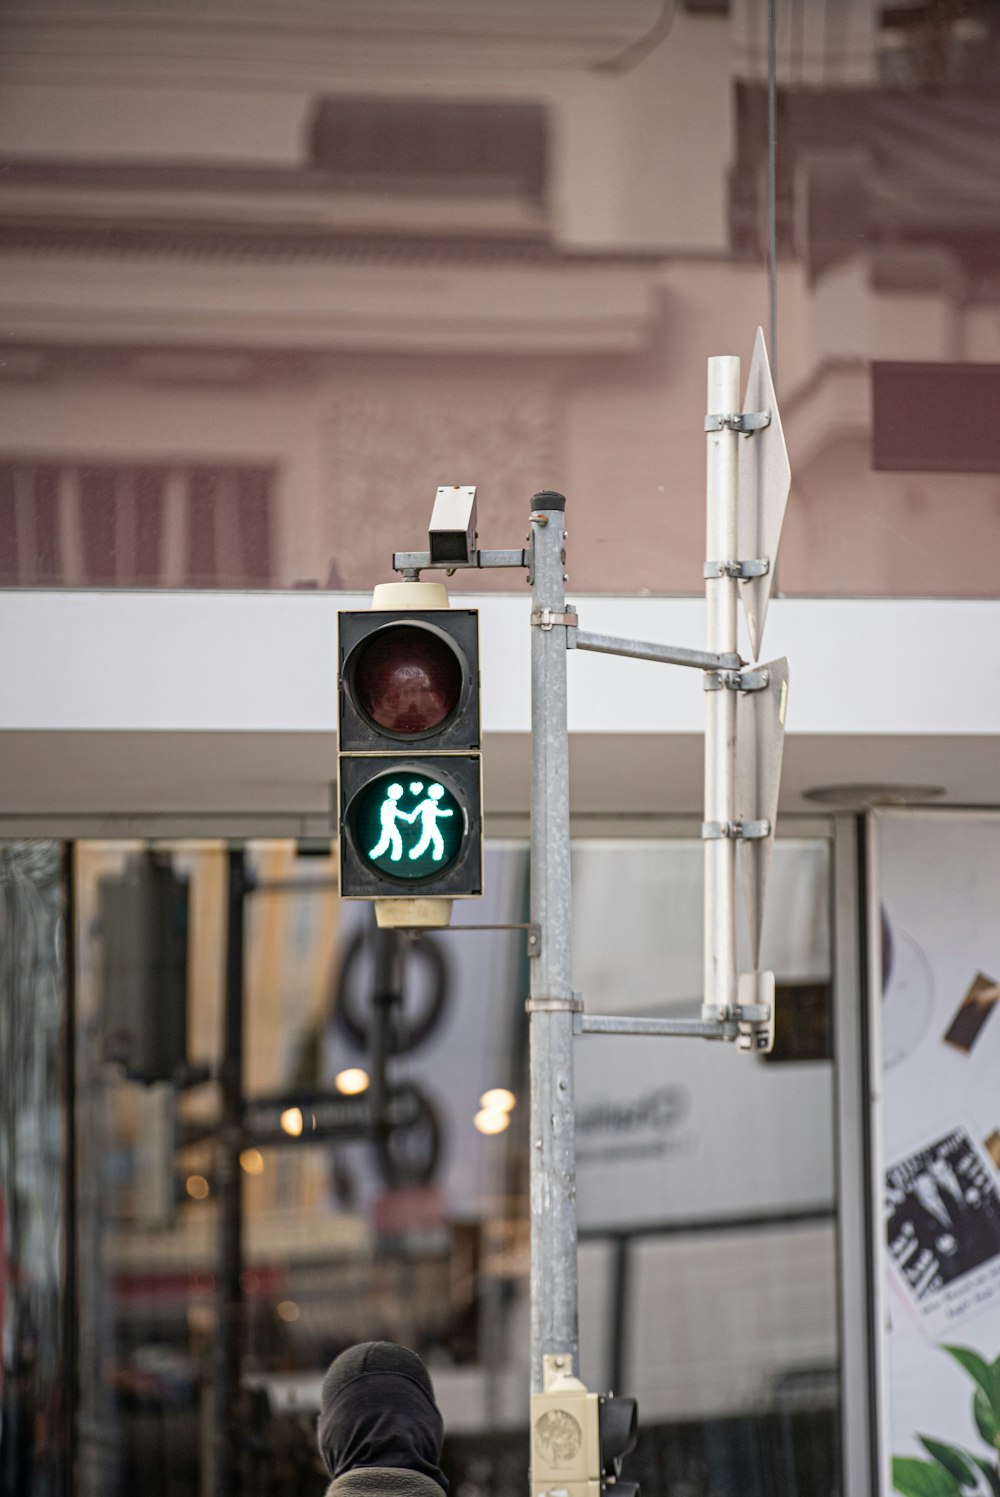 a pedestrian crossing signal in front of a store